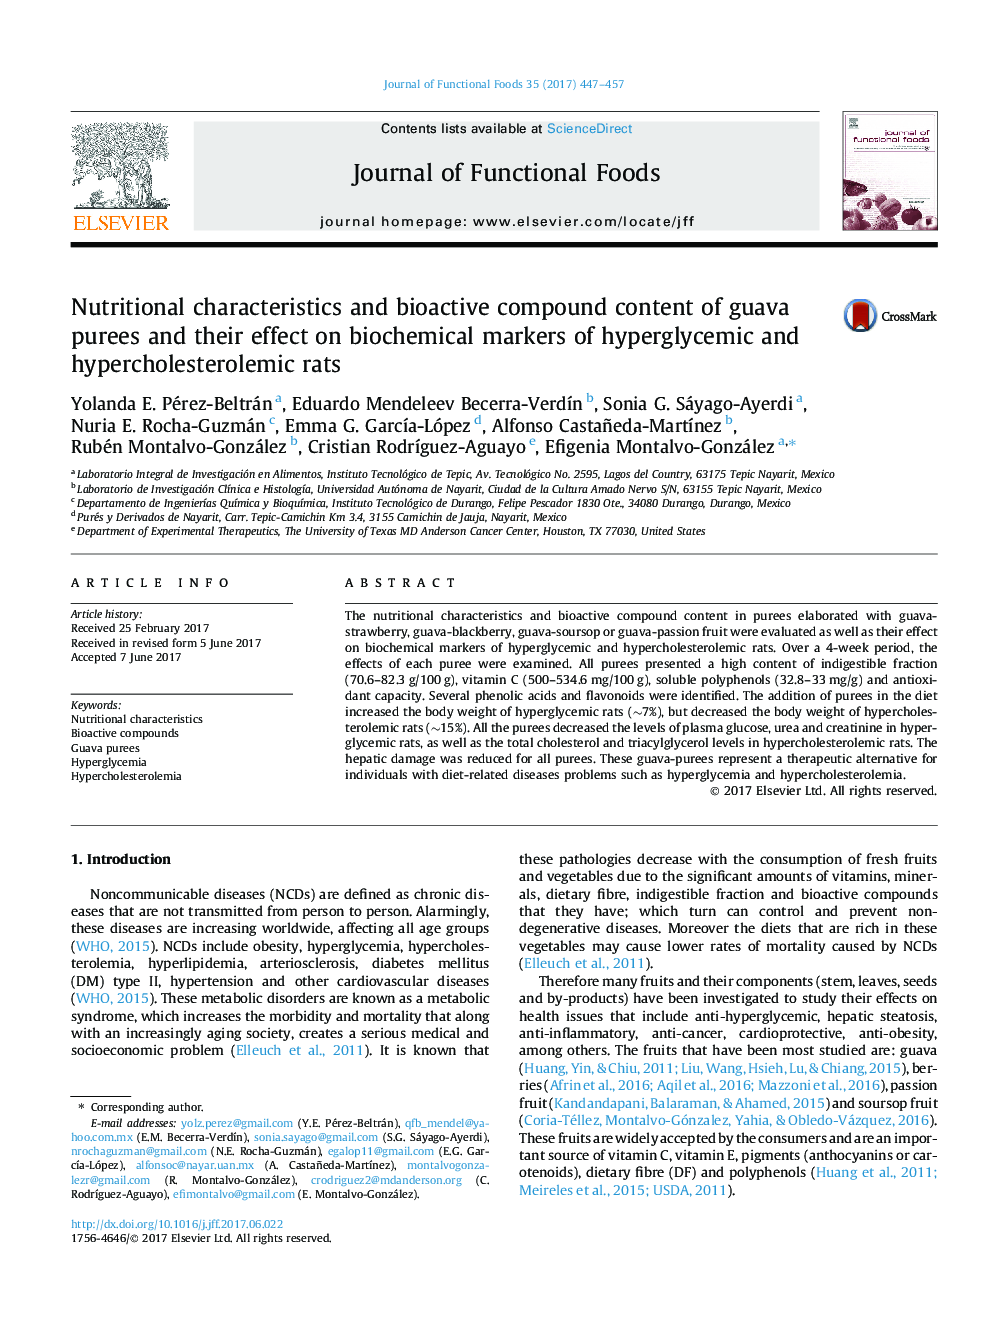 Nutritional characteristics and bioactive compound content of guava purees and their effect on biochemical markers of hyperglycemic and hypercholesterolemic rats